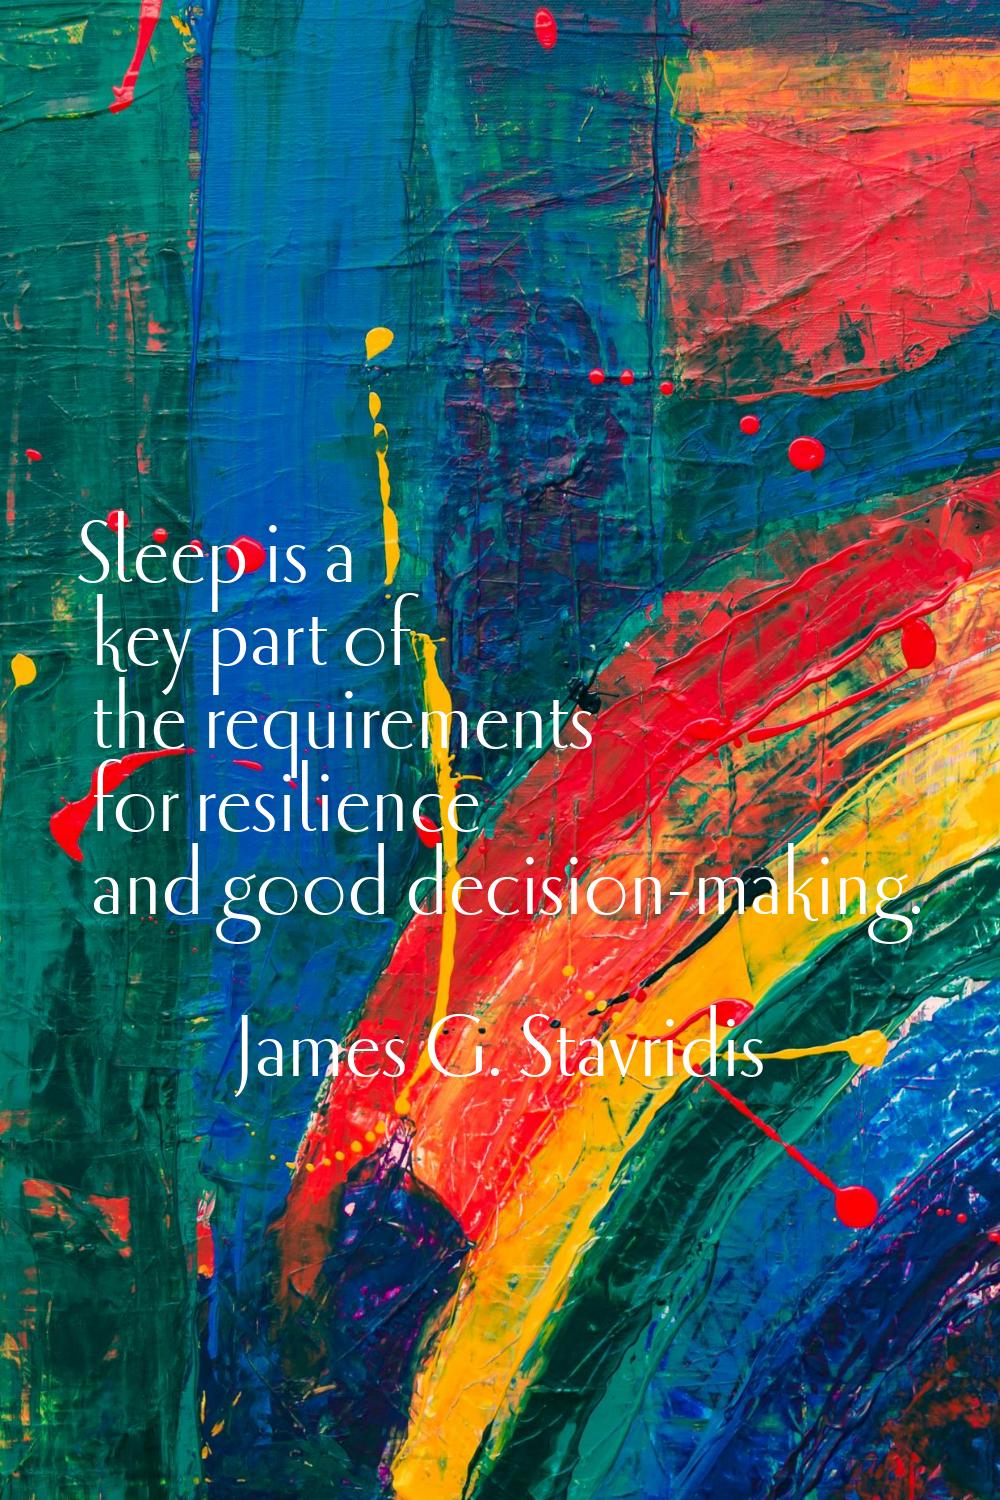 Sleep is a key part of the requirements for resilience and good decision-making.